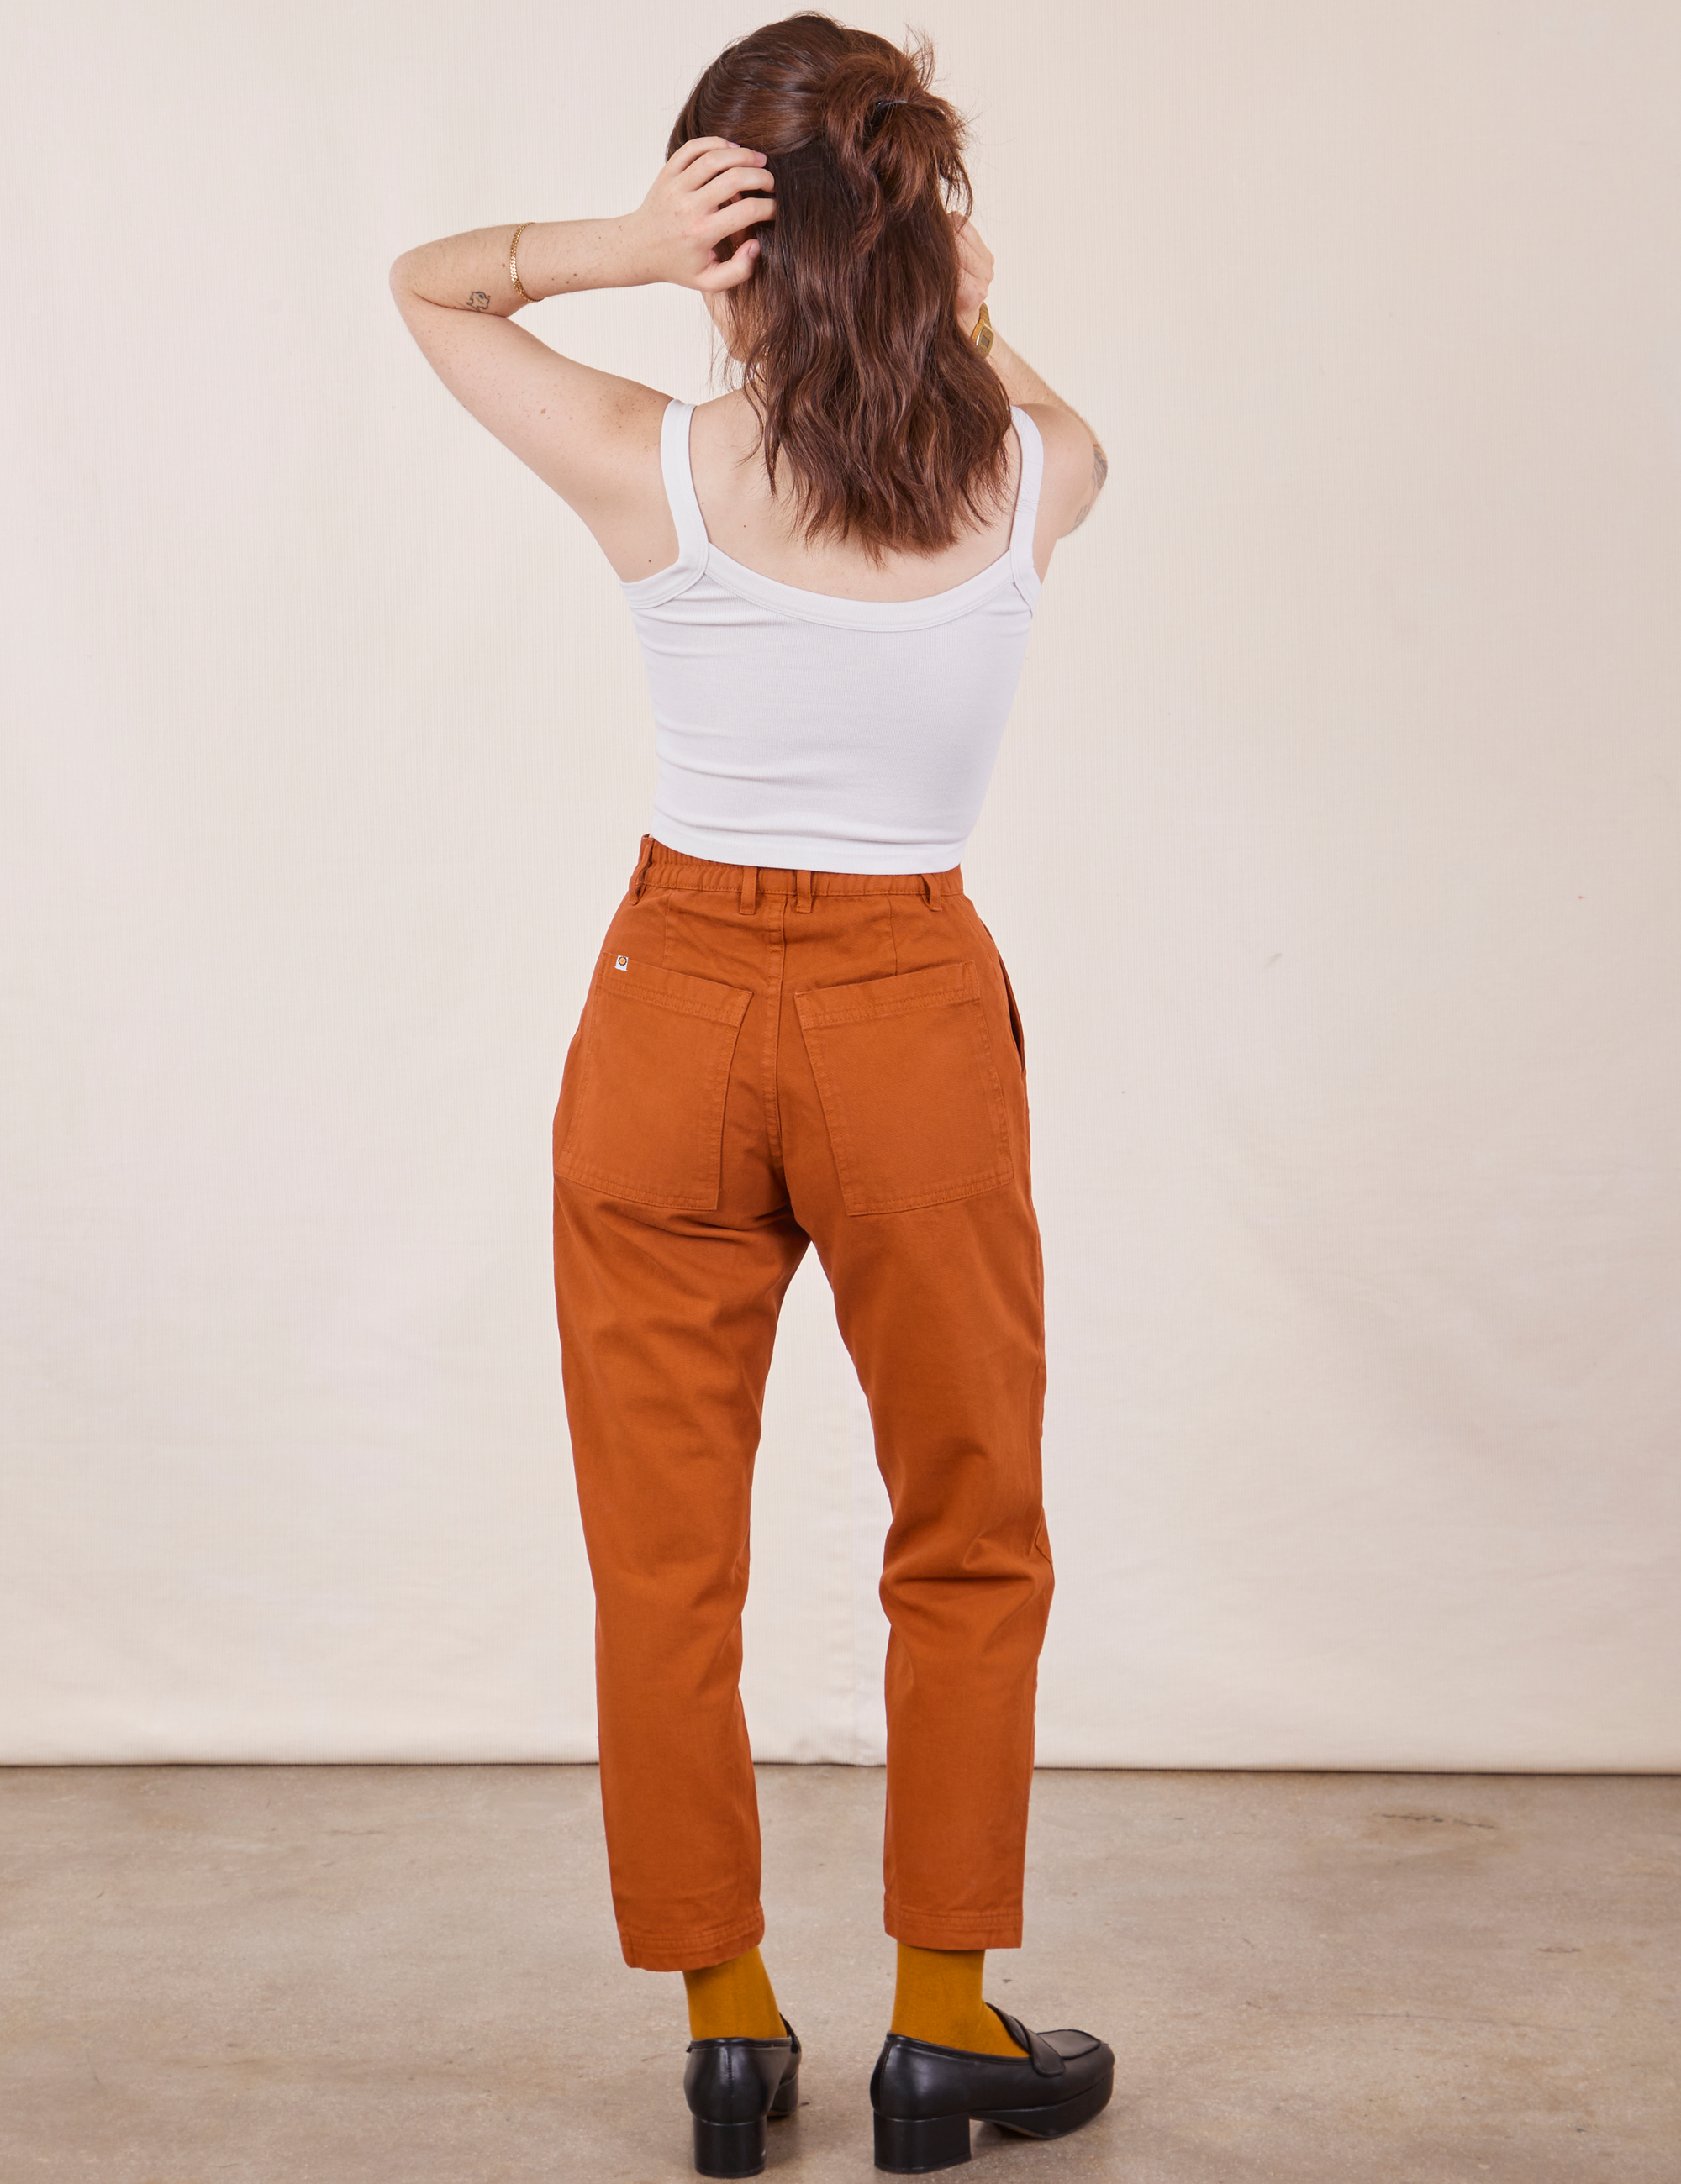 Back view of Petite Pencil Pants in Burnt Terracotta and Cropped Cami in vintage tee off-white on Hana